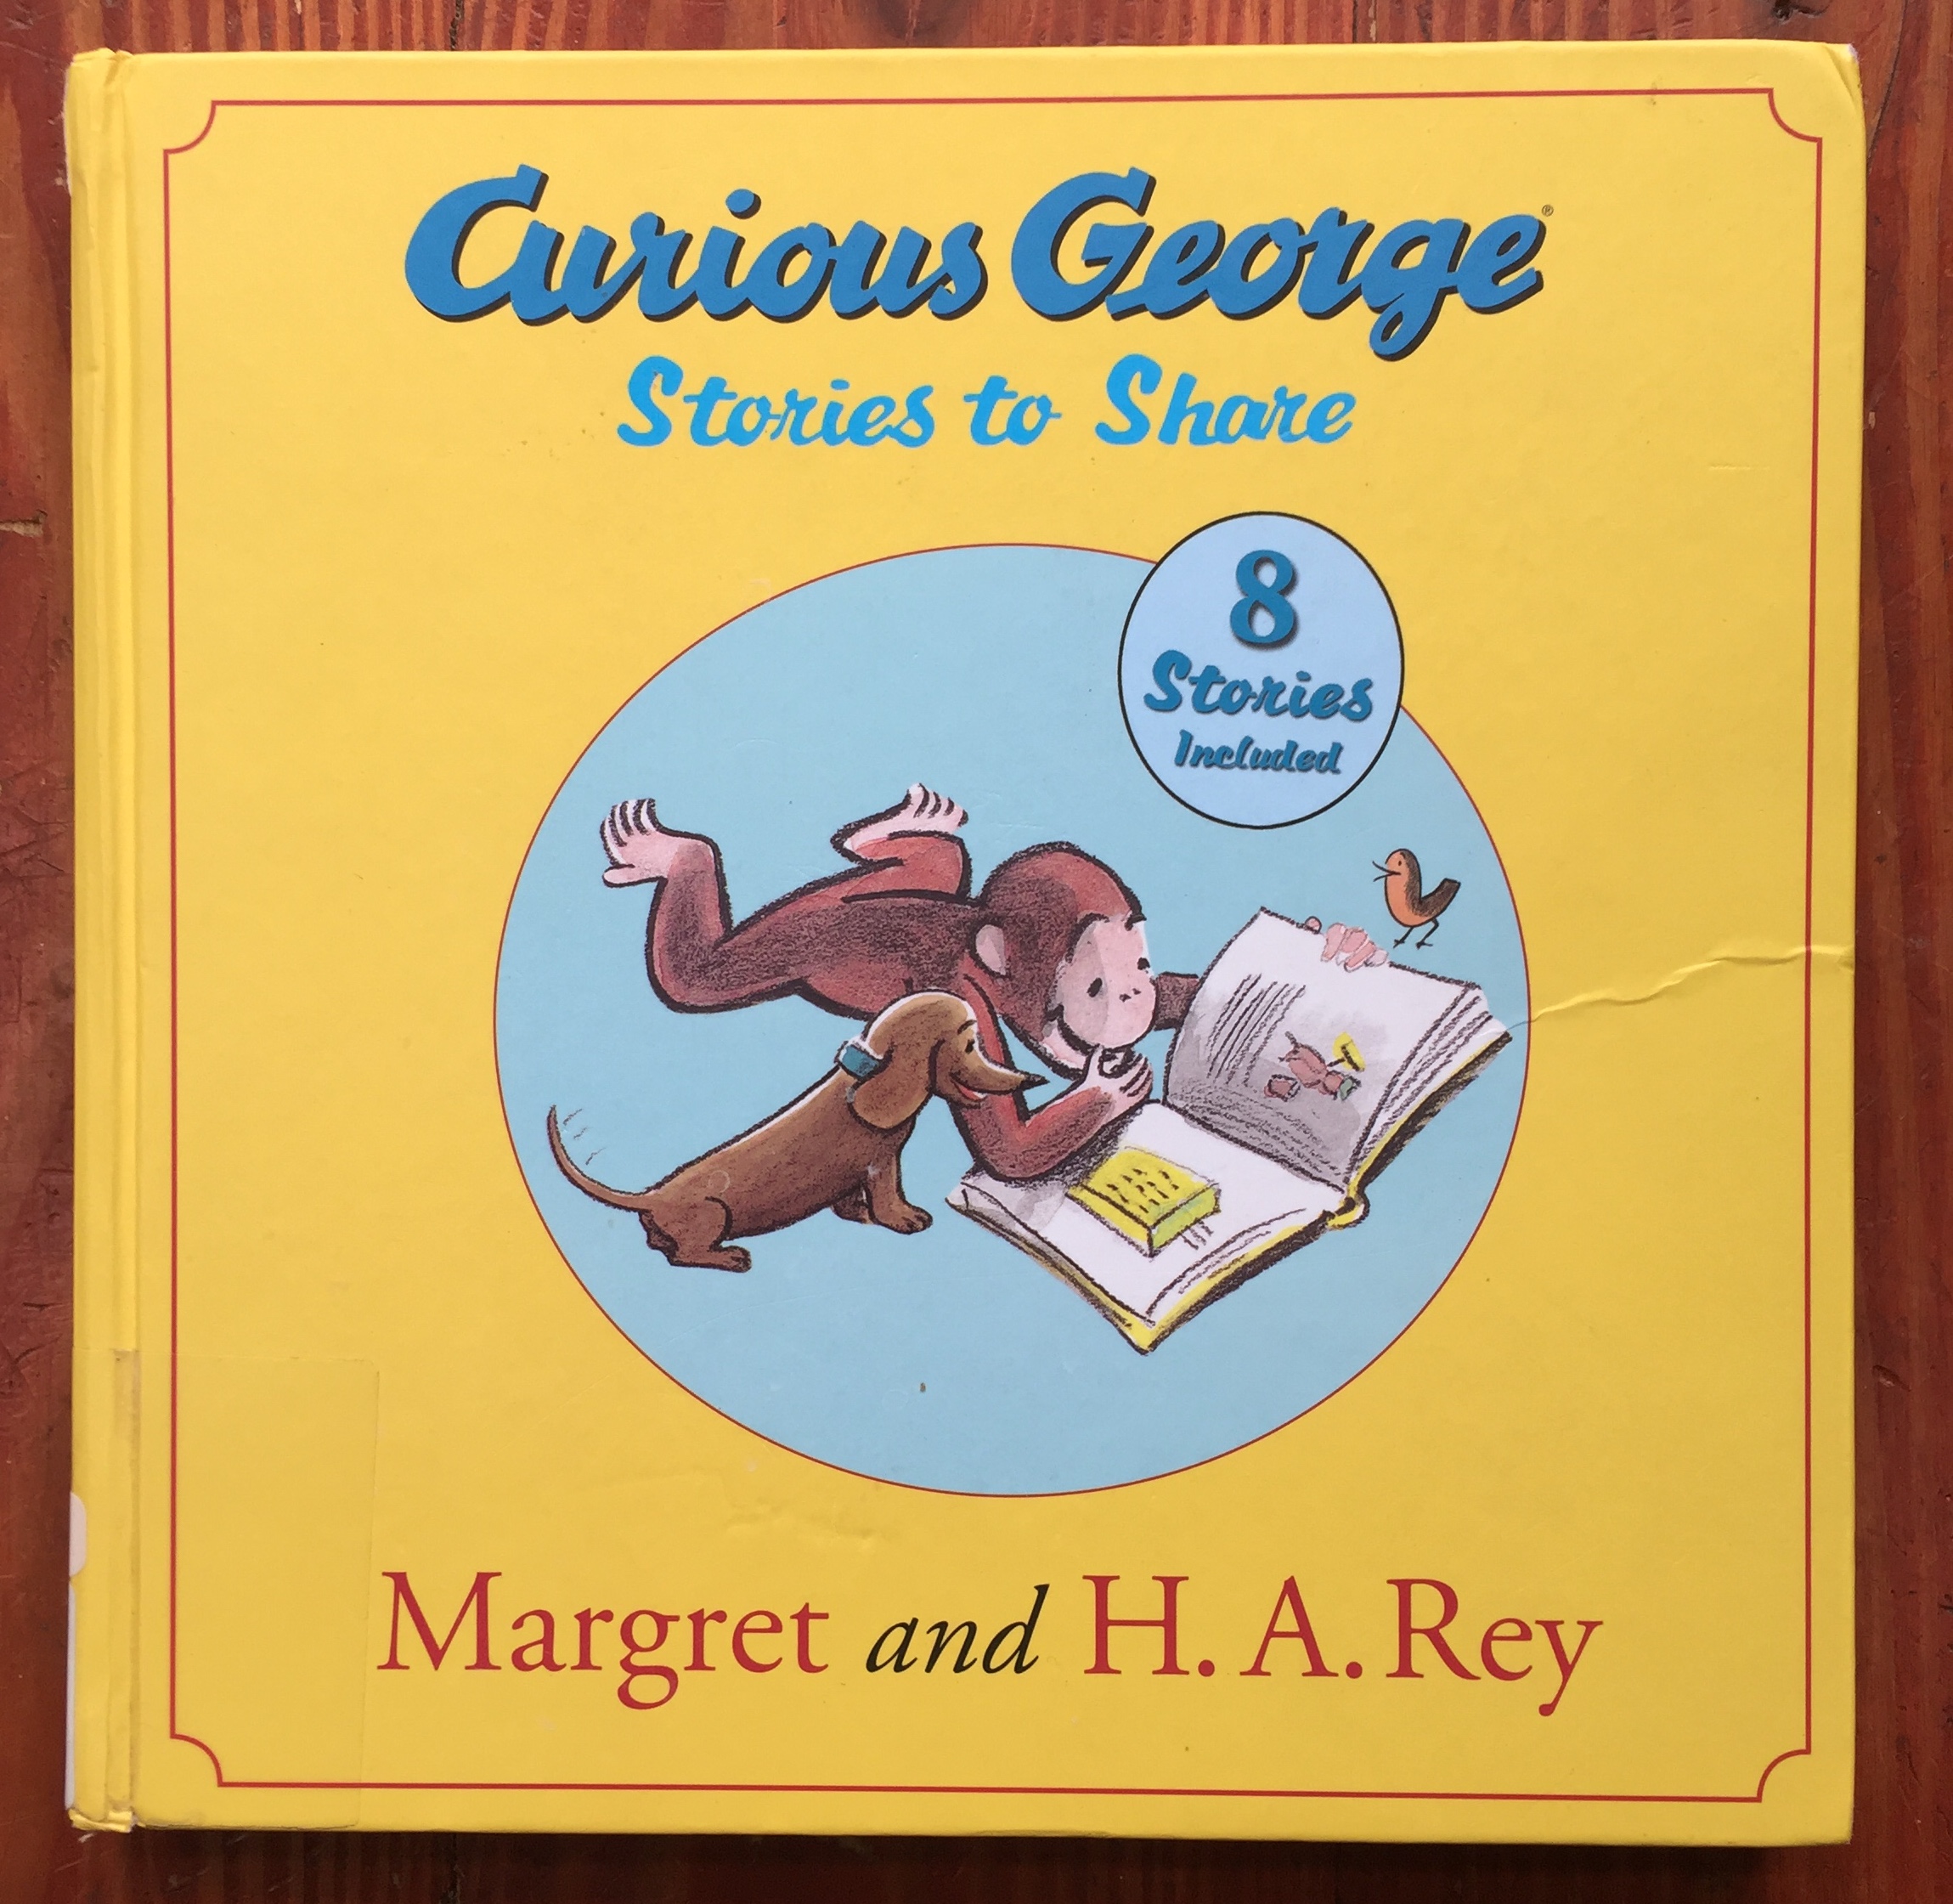 Curious George Stories to Share picture book by Margret and H.A. Rey